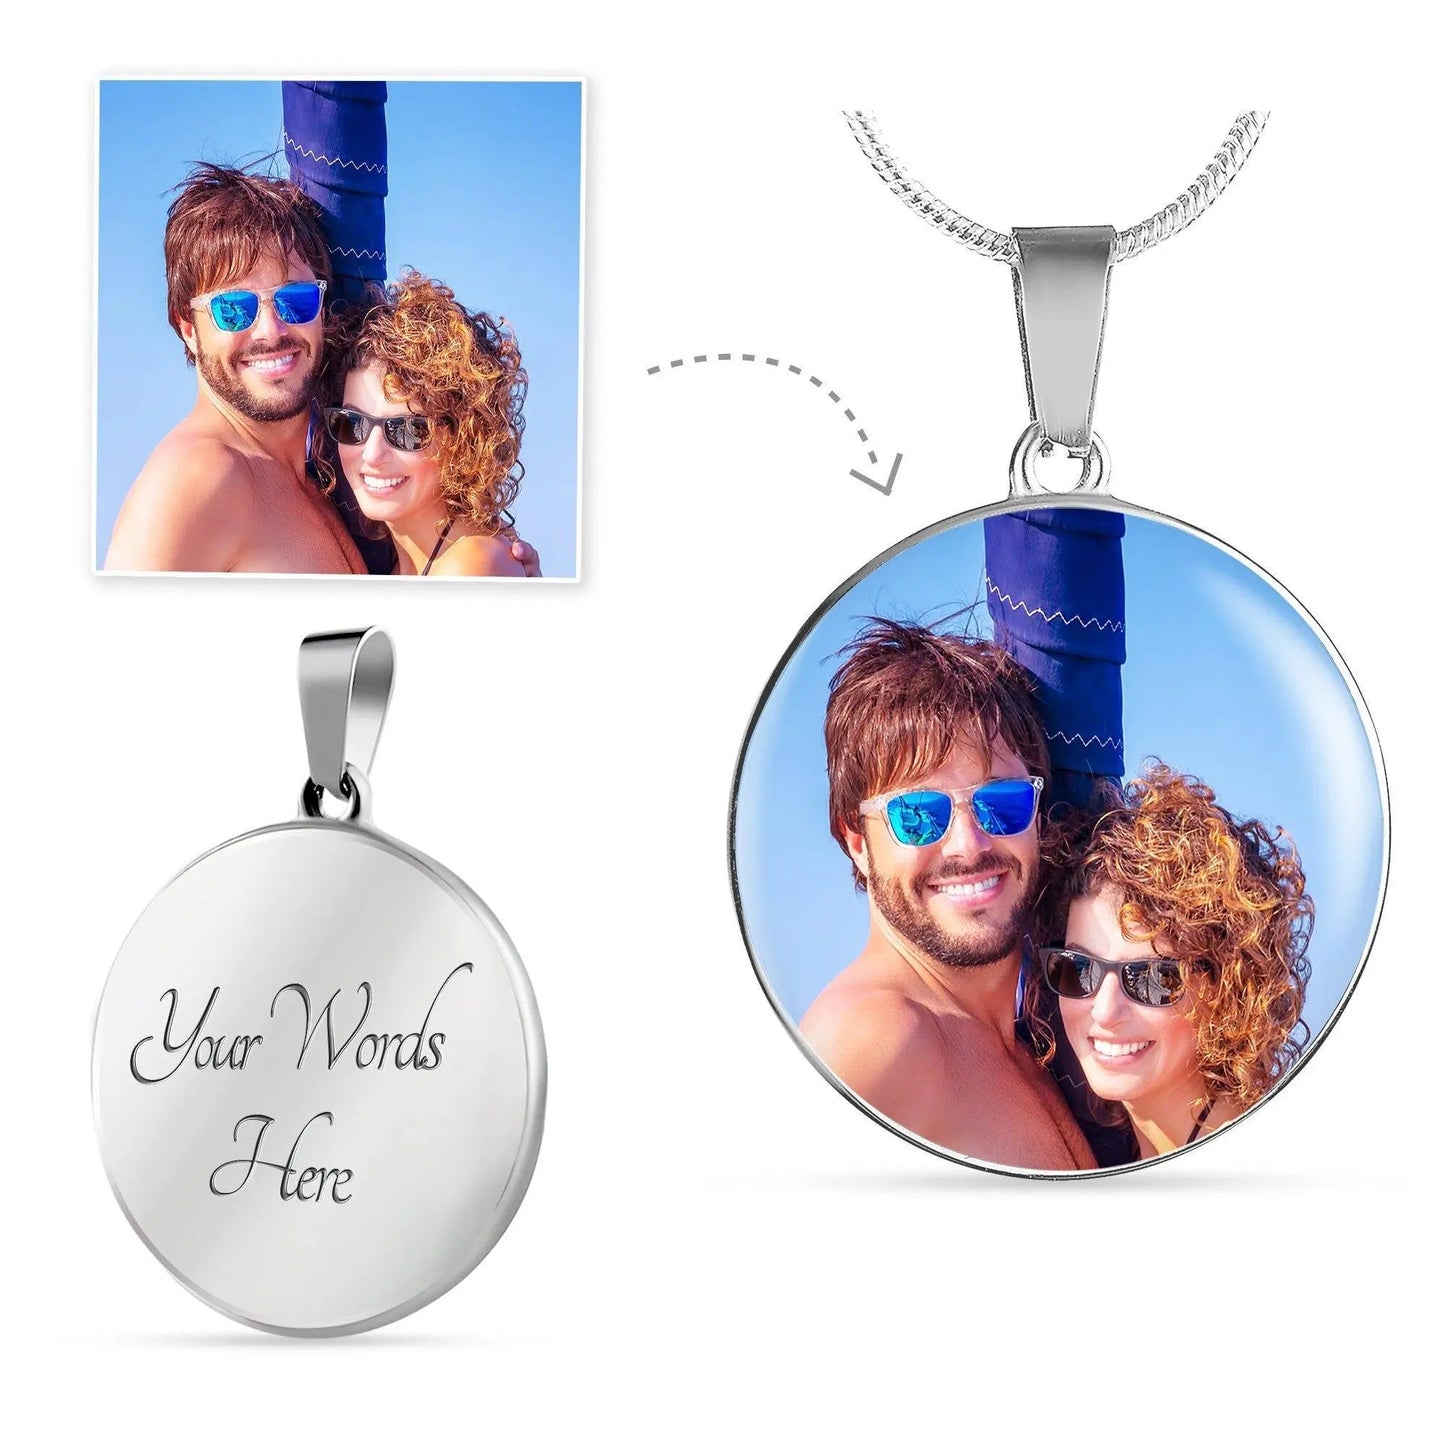 CardWelry Personalized Photo Necklace, Custom Photo Pendant Memory Necklace with Picture, Customized Picture Necklace For Her, Women Necklace Gifts Jewelry